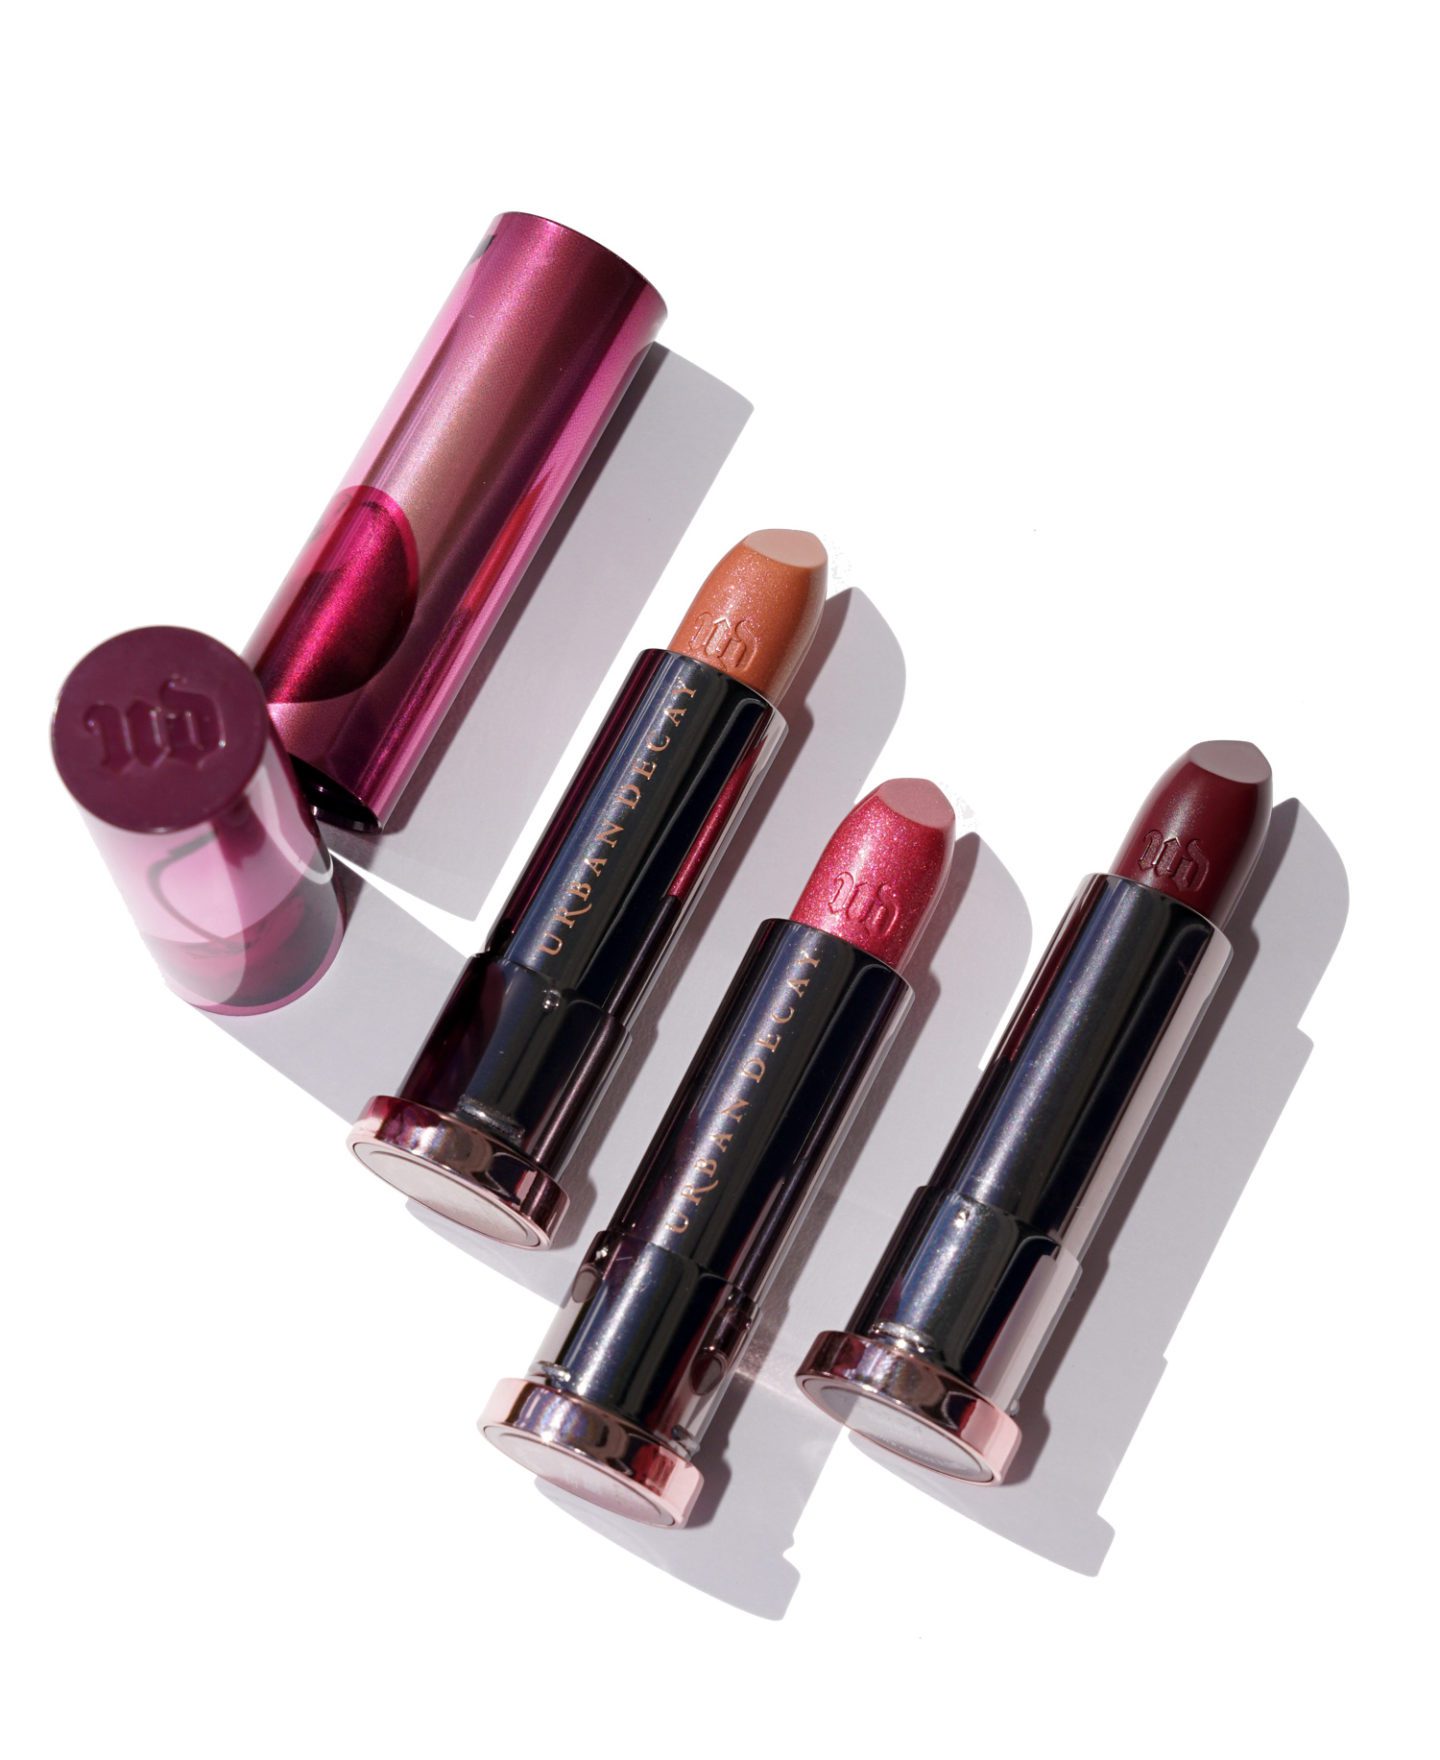 Urban Decay Naked Cherry Vice Lipsticks in Juicy, Devilish and Cherry